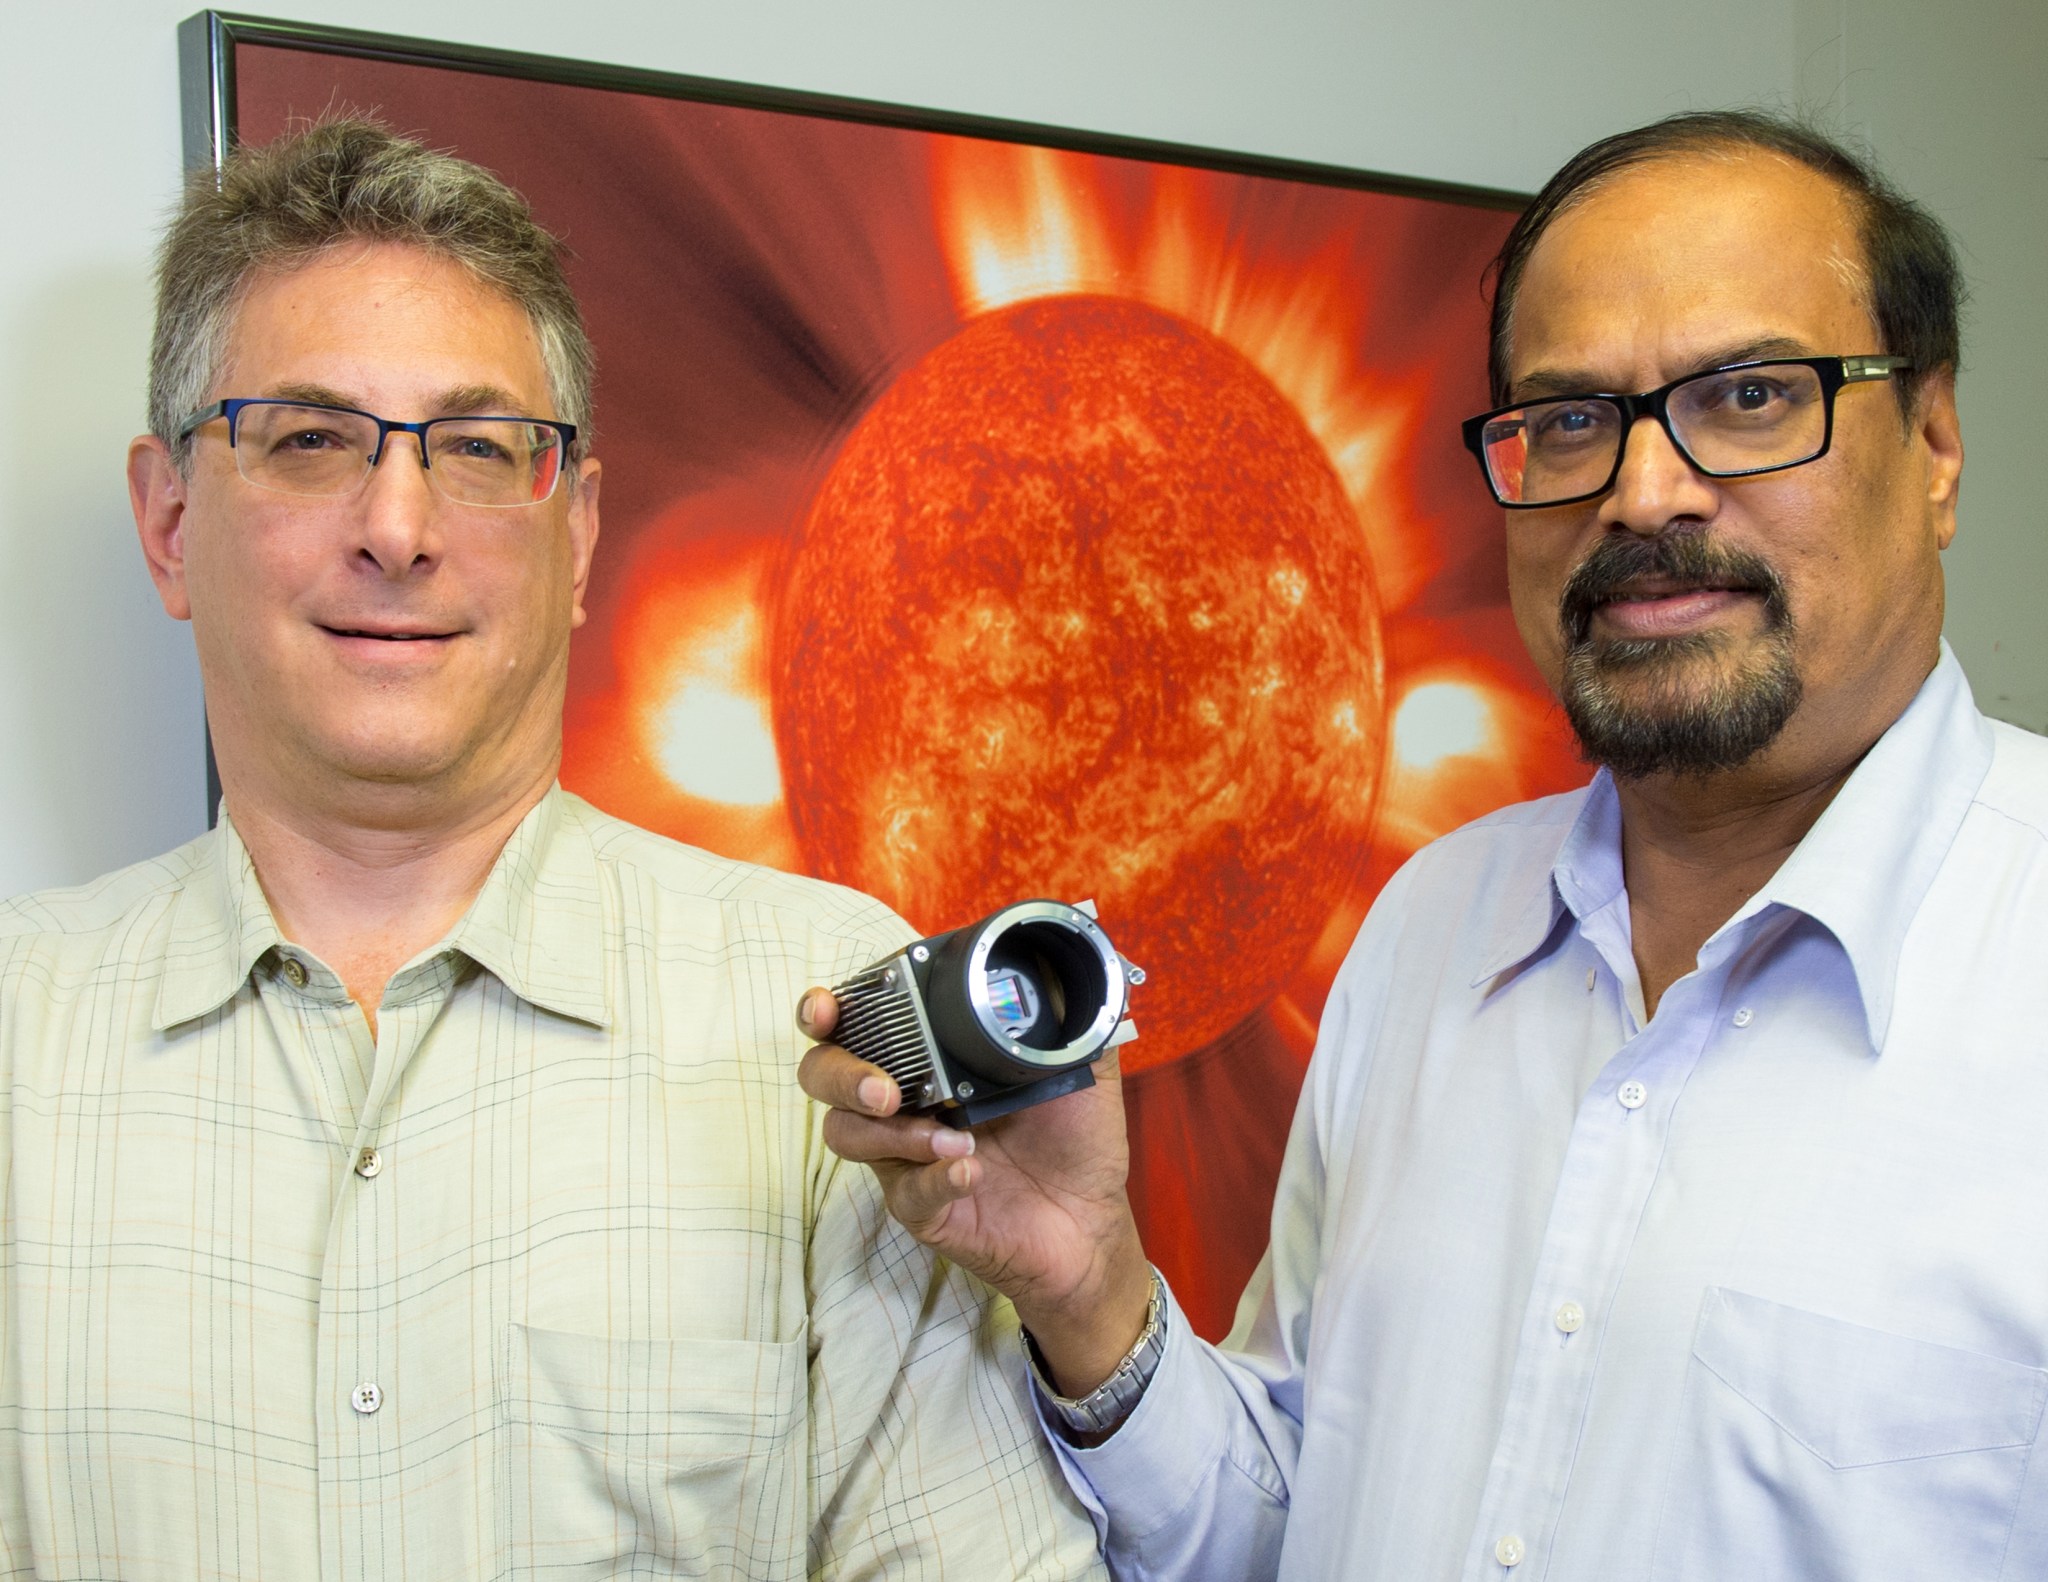 Heliophysicists Jeff Newmark (left) and Nat Gopalswamy (right) standing in front of a poster of a Sun image and holding a polarization camera